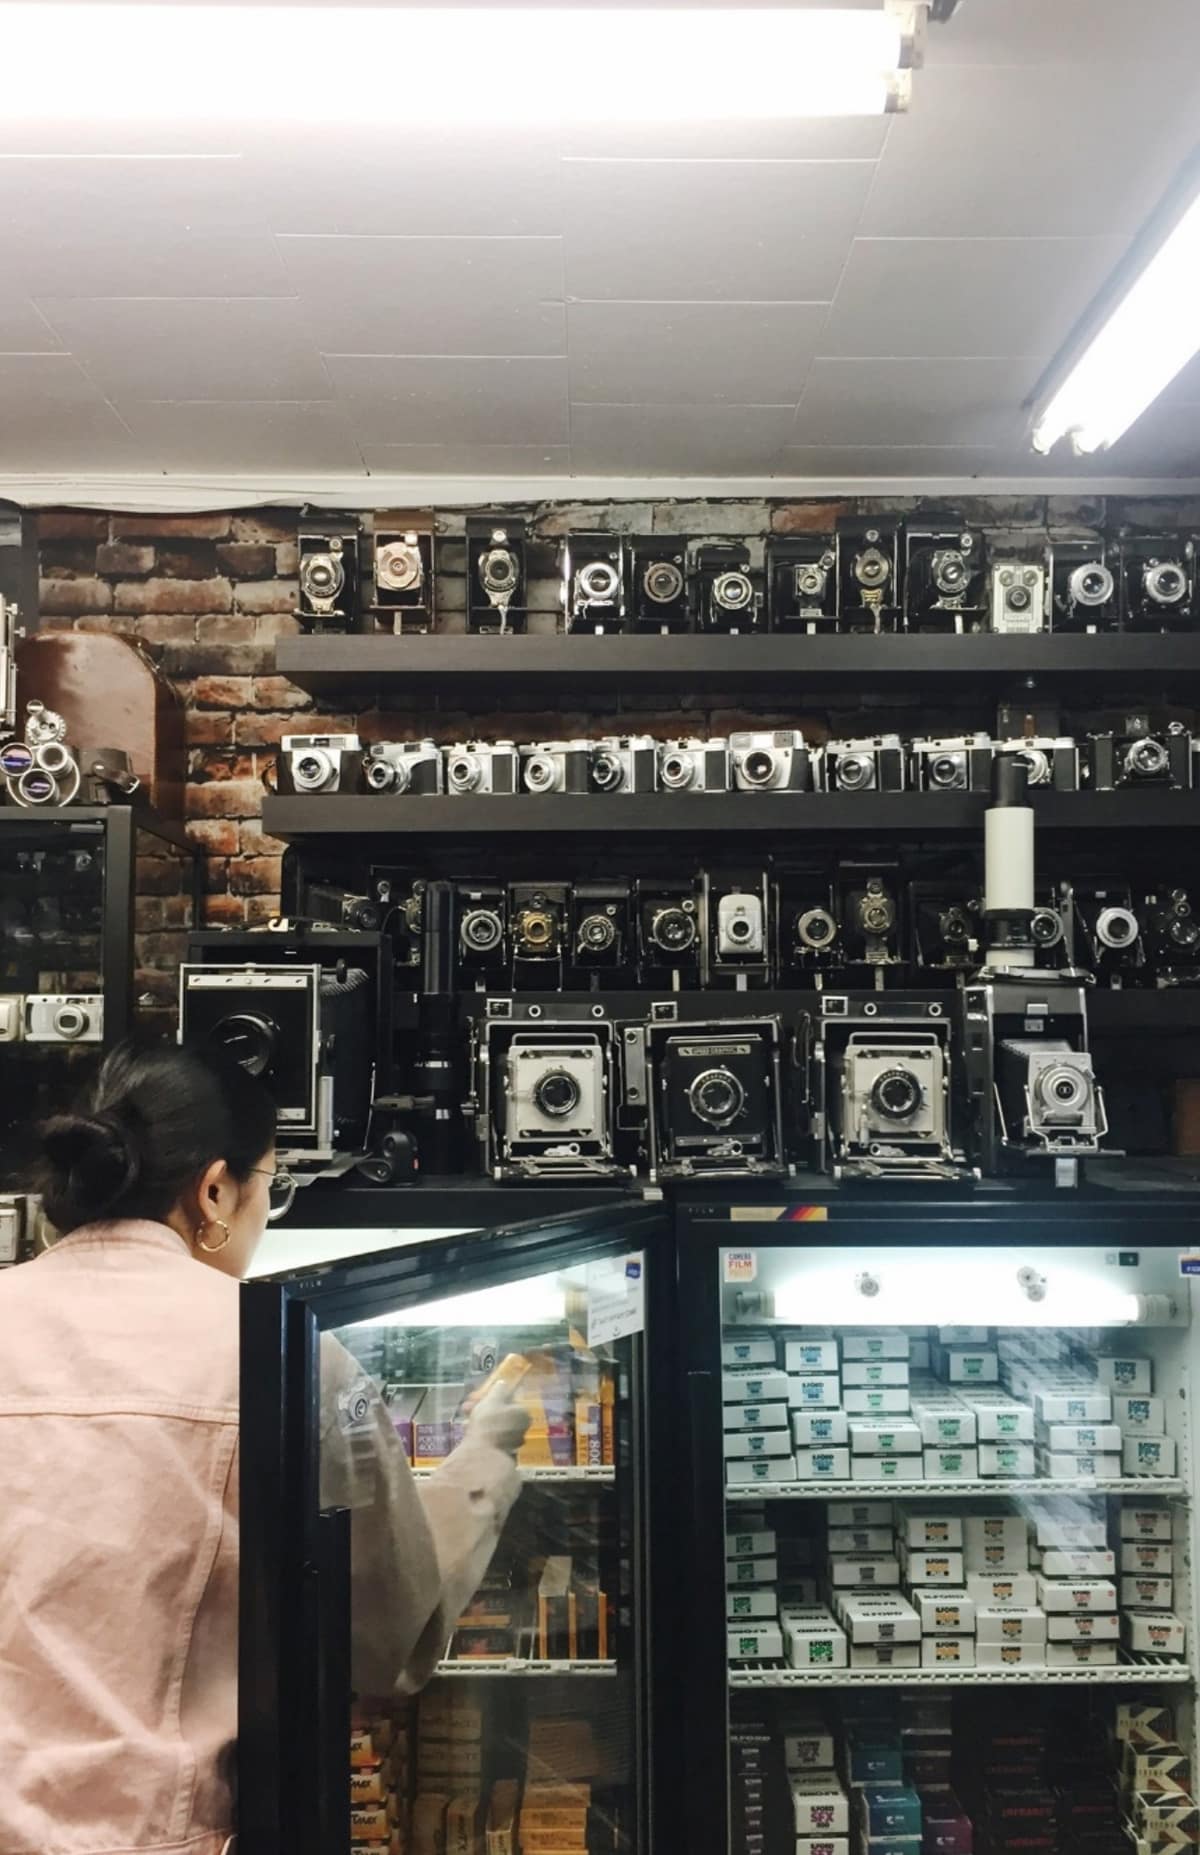 image description: a woman is seen from behind, reacing into a glass sales case, surrounded by vintage cameras.